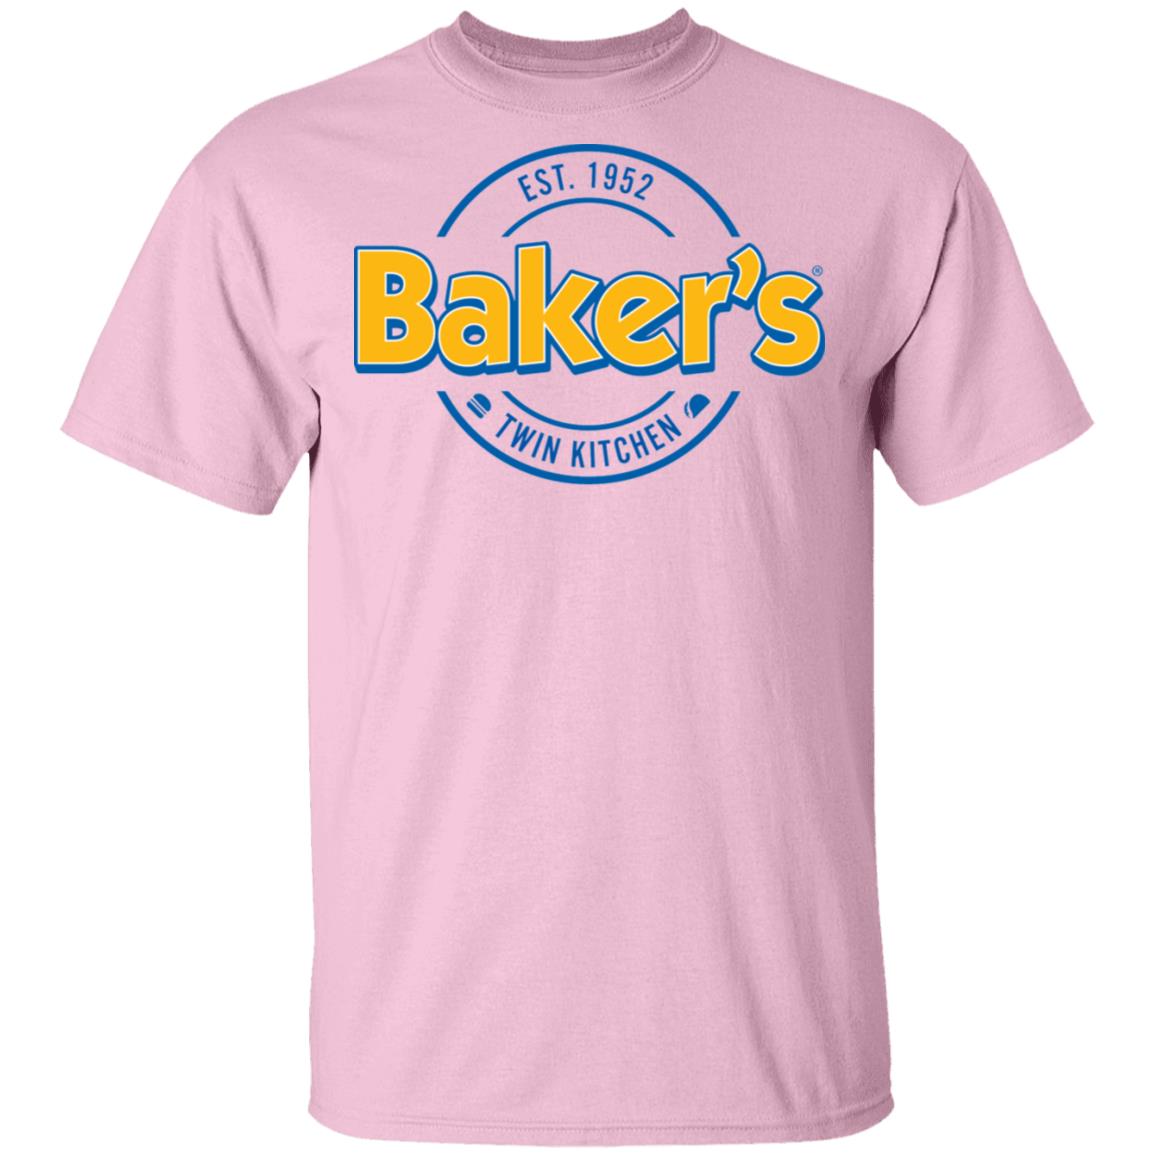 Bakers5